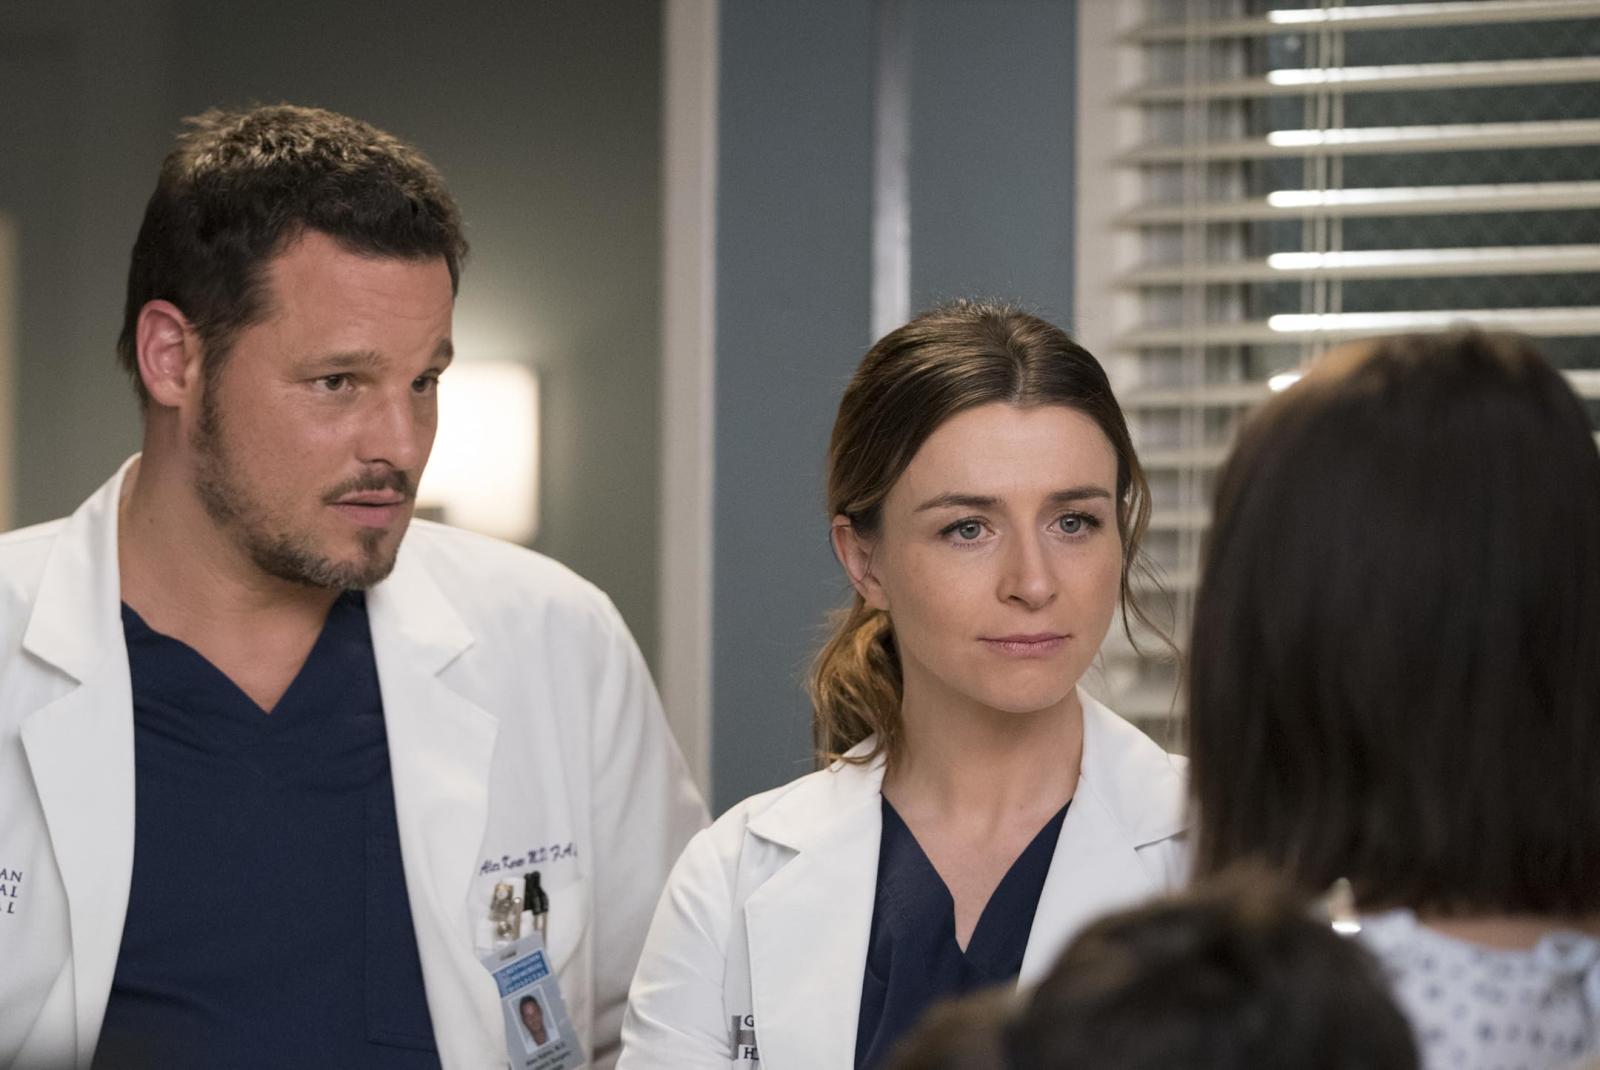 Grey’s Anatomy Hid Clues Hinting at Characters’ Future In Plain Sight, But No One Ever Looked - image 1